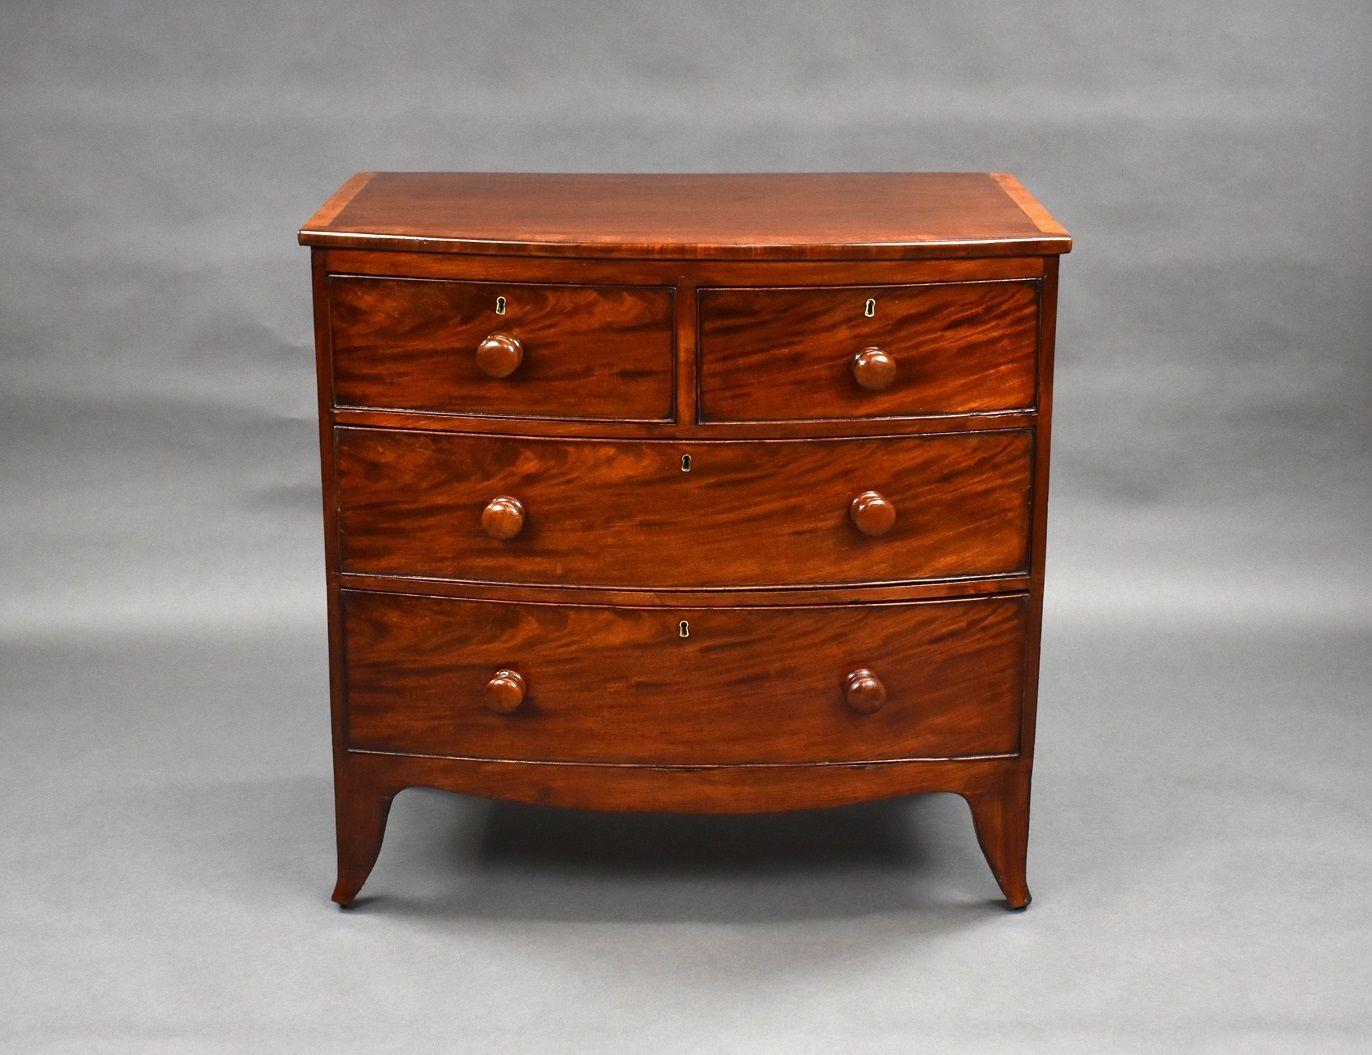 For sale is a Regency mahogany bow front chest of drawers, having a banded top above an arrangement of two short over two long drawers, each having well figured drawer fronts with bun handles. The chest is raised on splayed feet and is in good